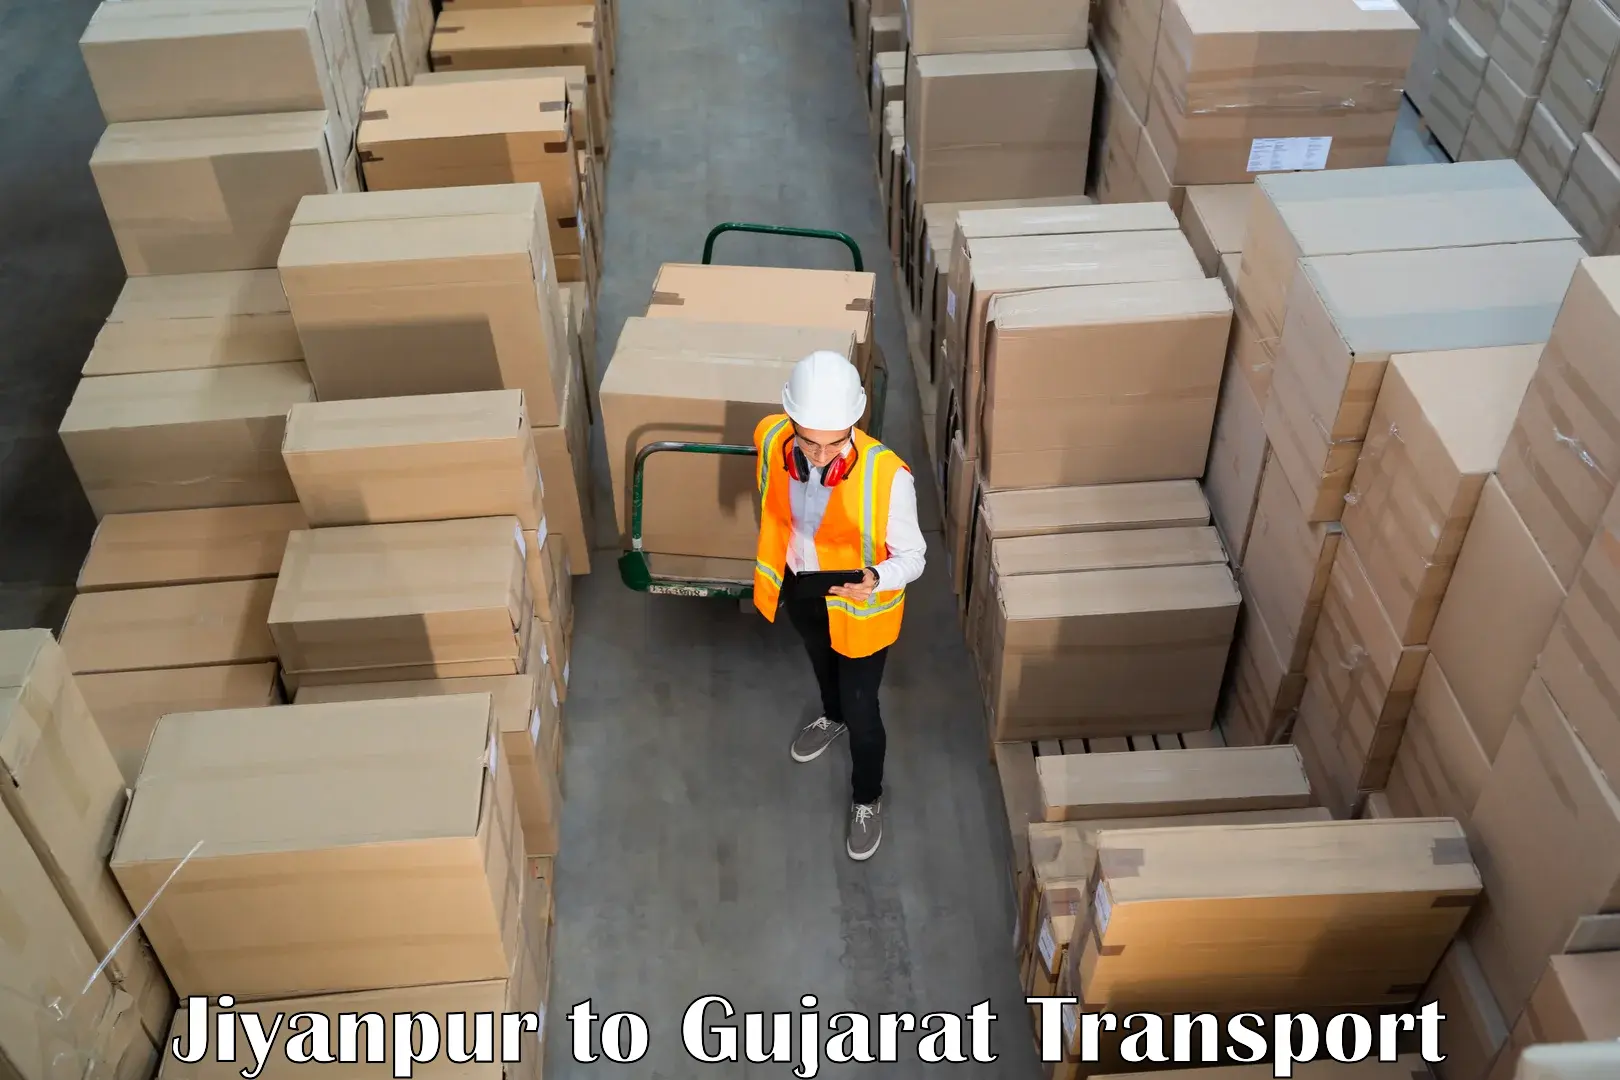 Part load transport service in India Jiyanpur to Lunawada